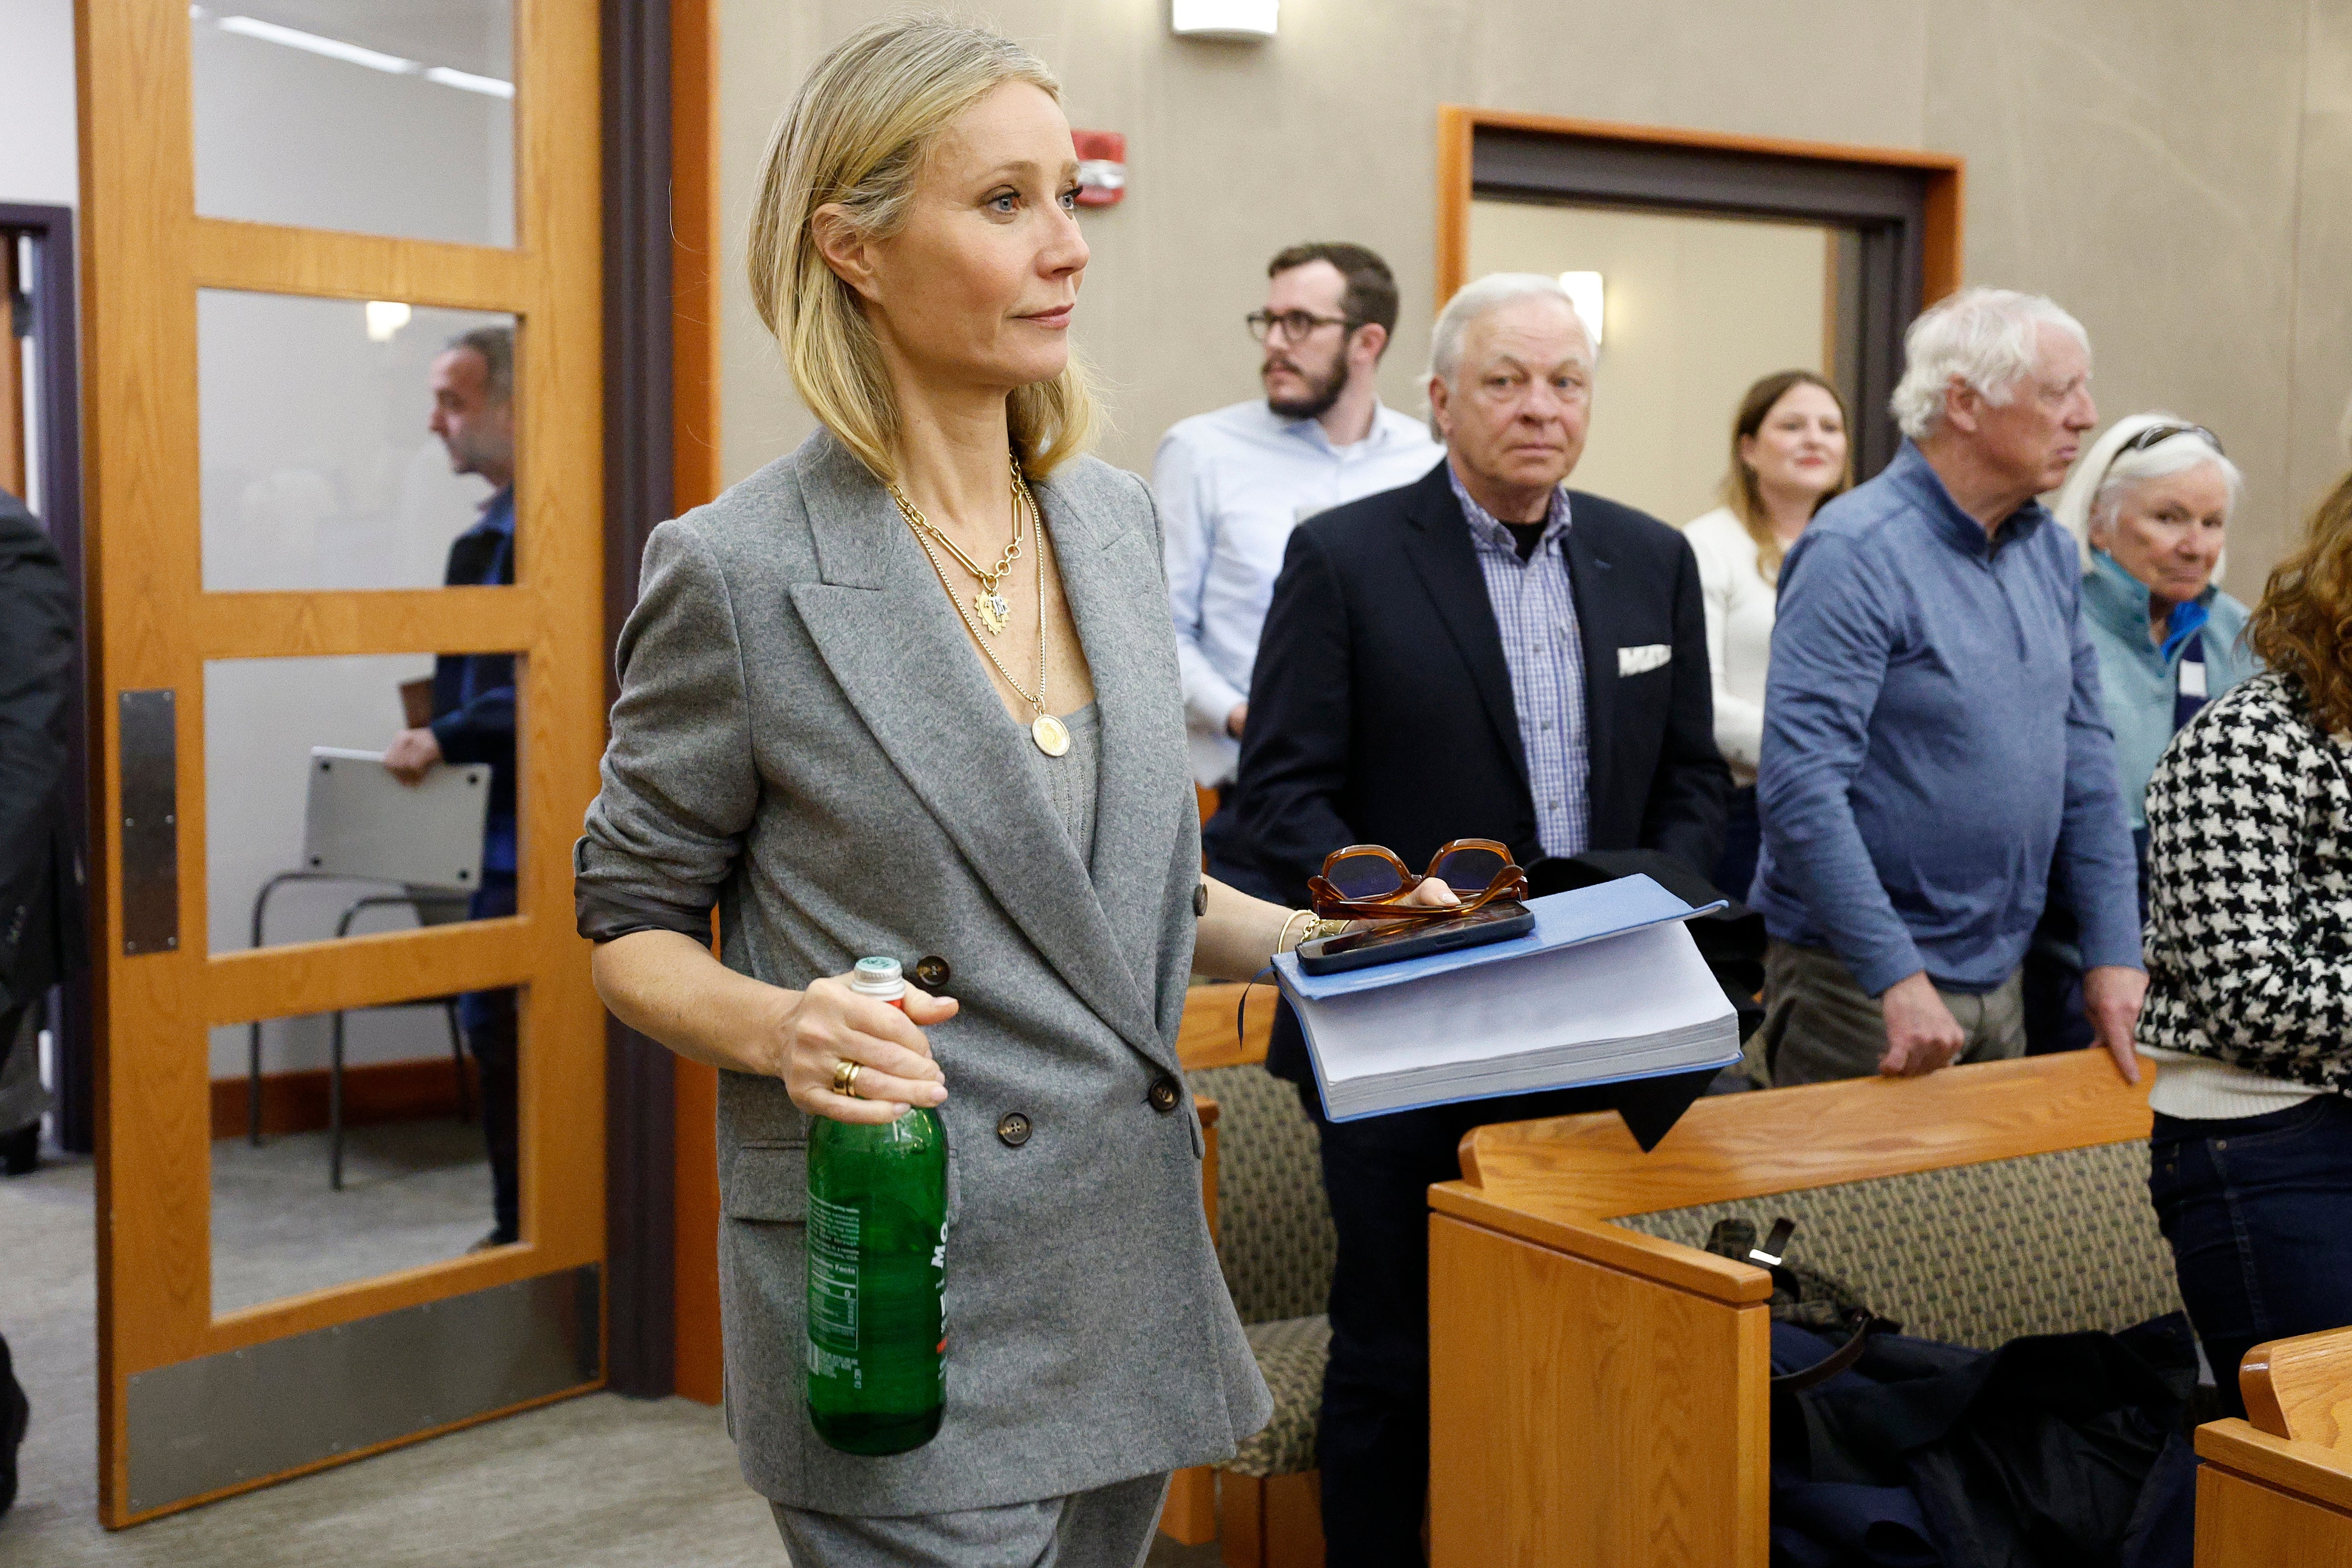 Gwyneth Paltrow enters the courtroom after a lunch break